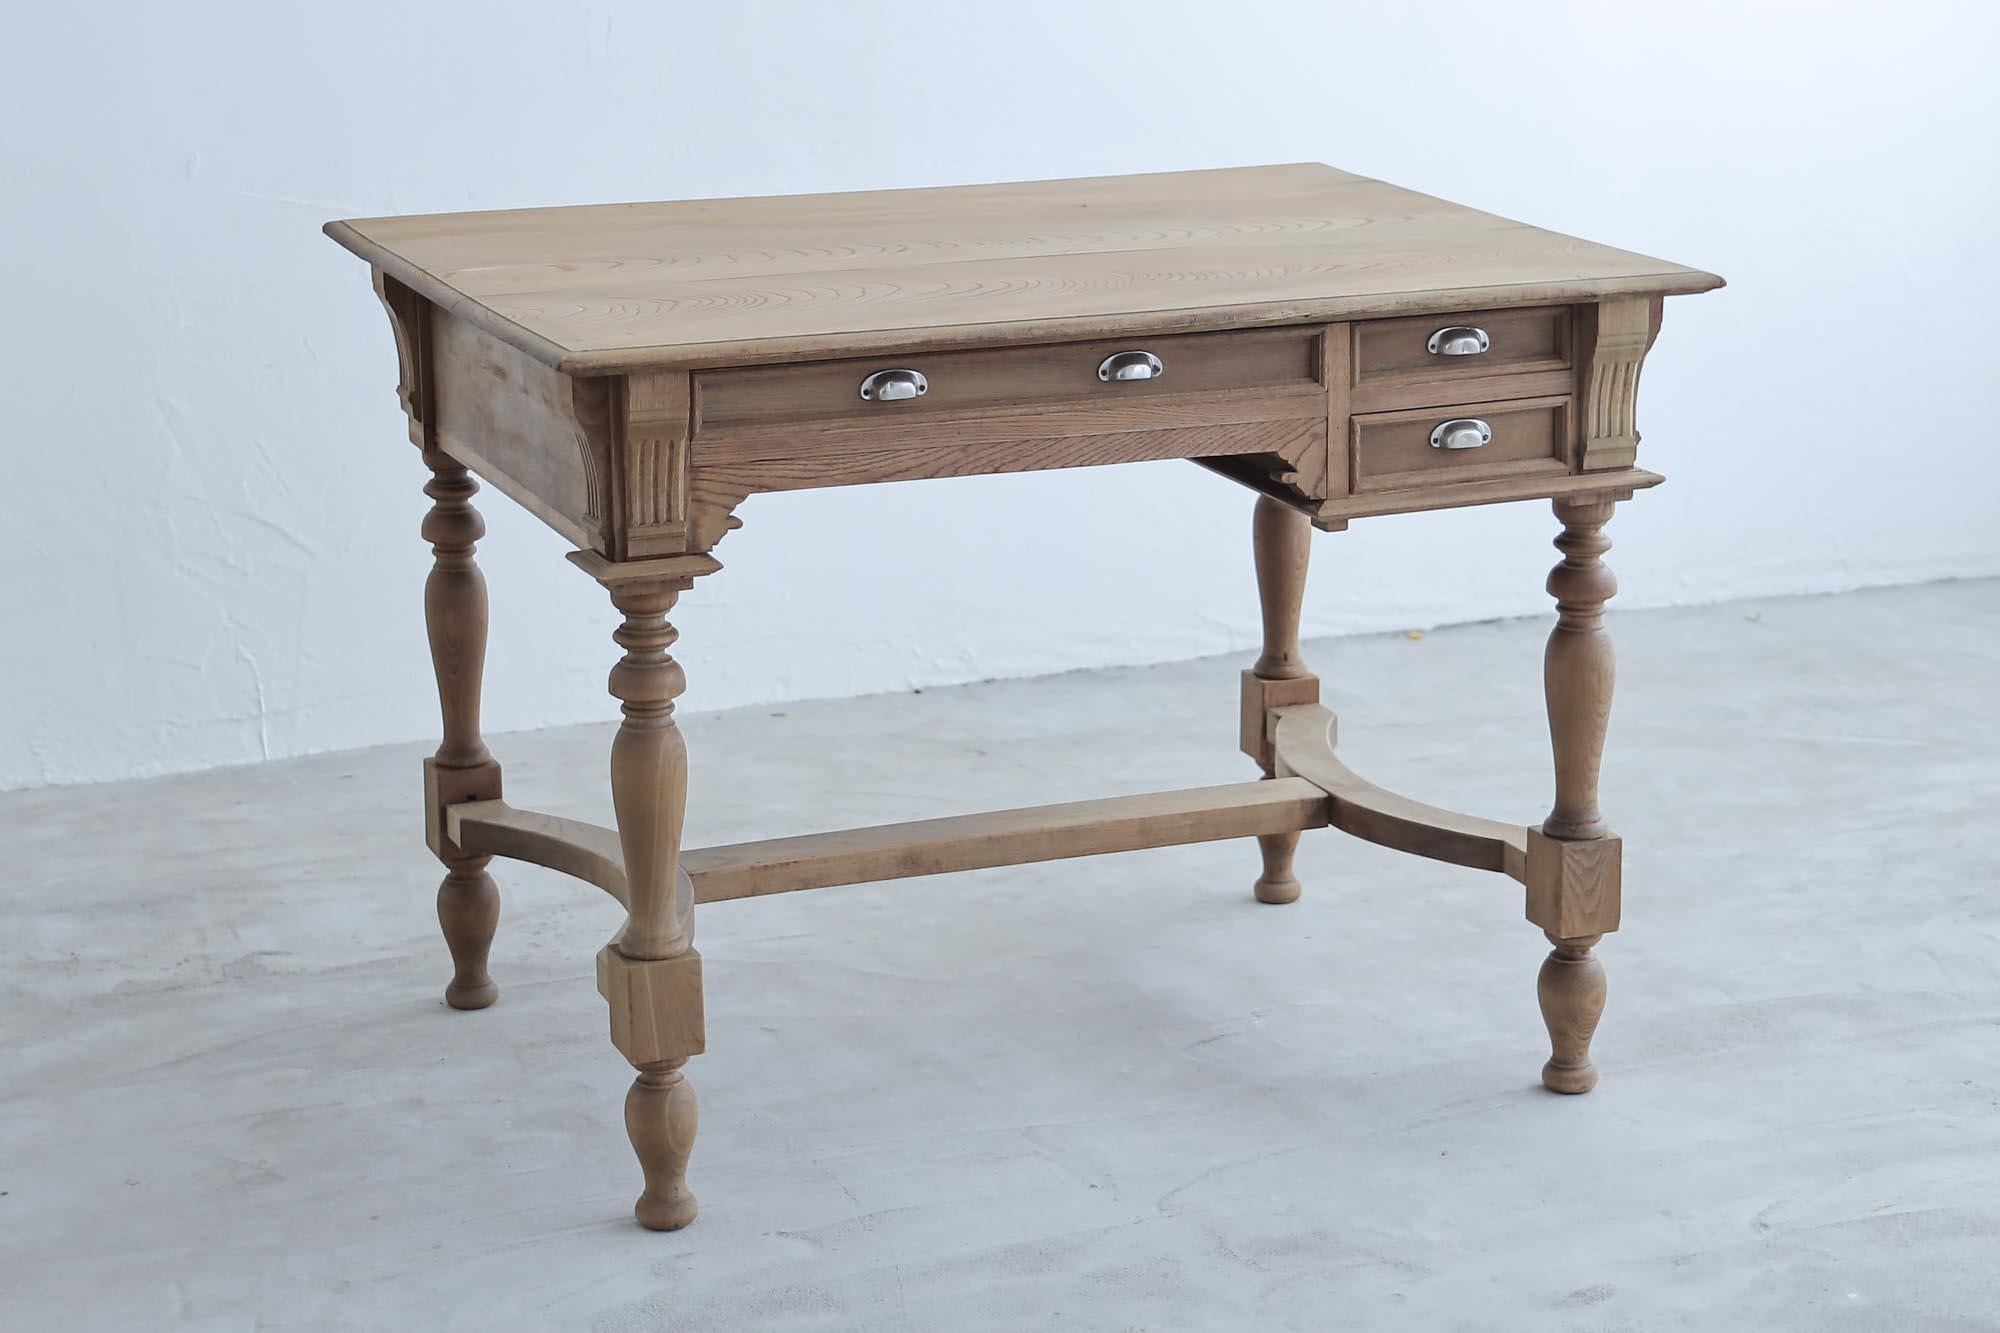 Hand-Crafted Japanese Antique Desk, Wabi-Sabi, Early 20th Century